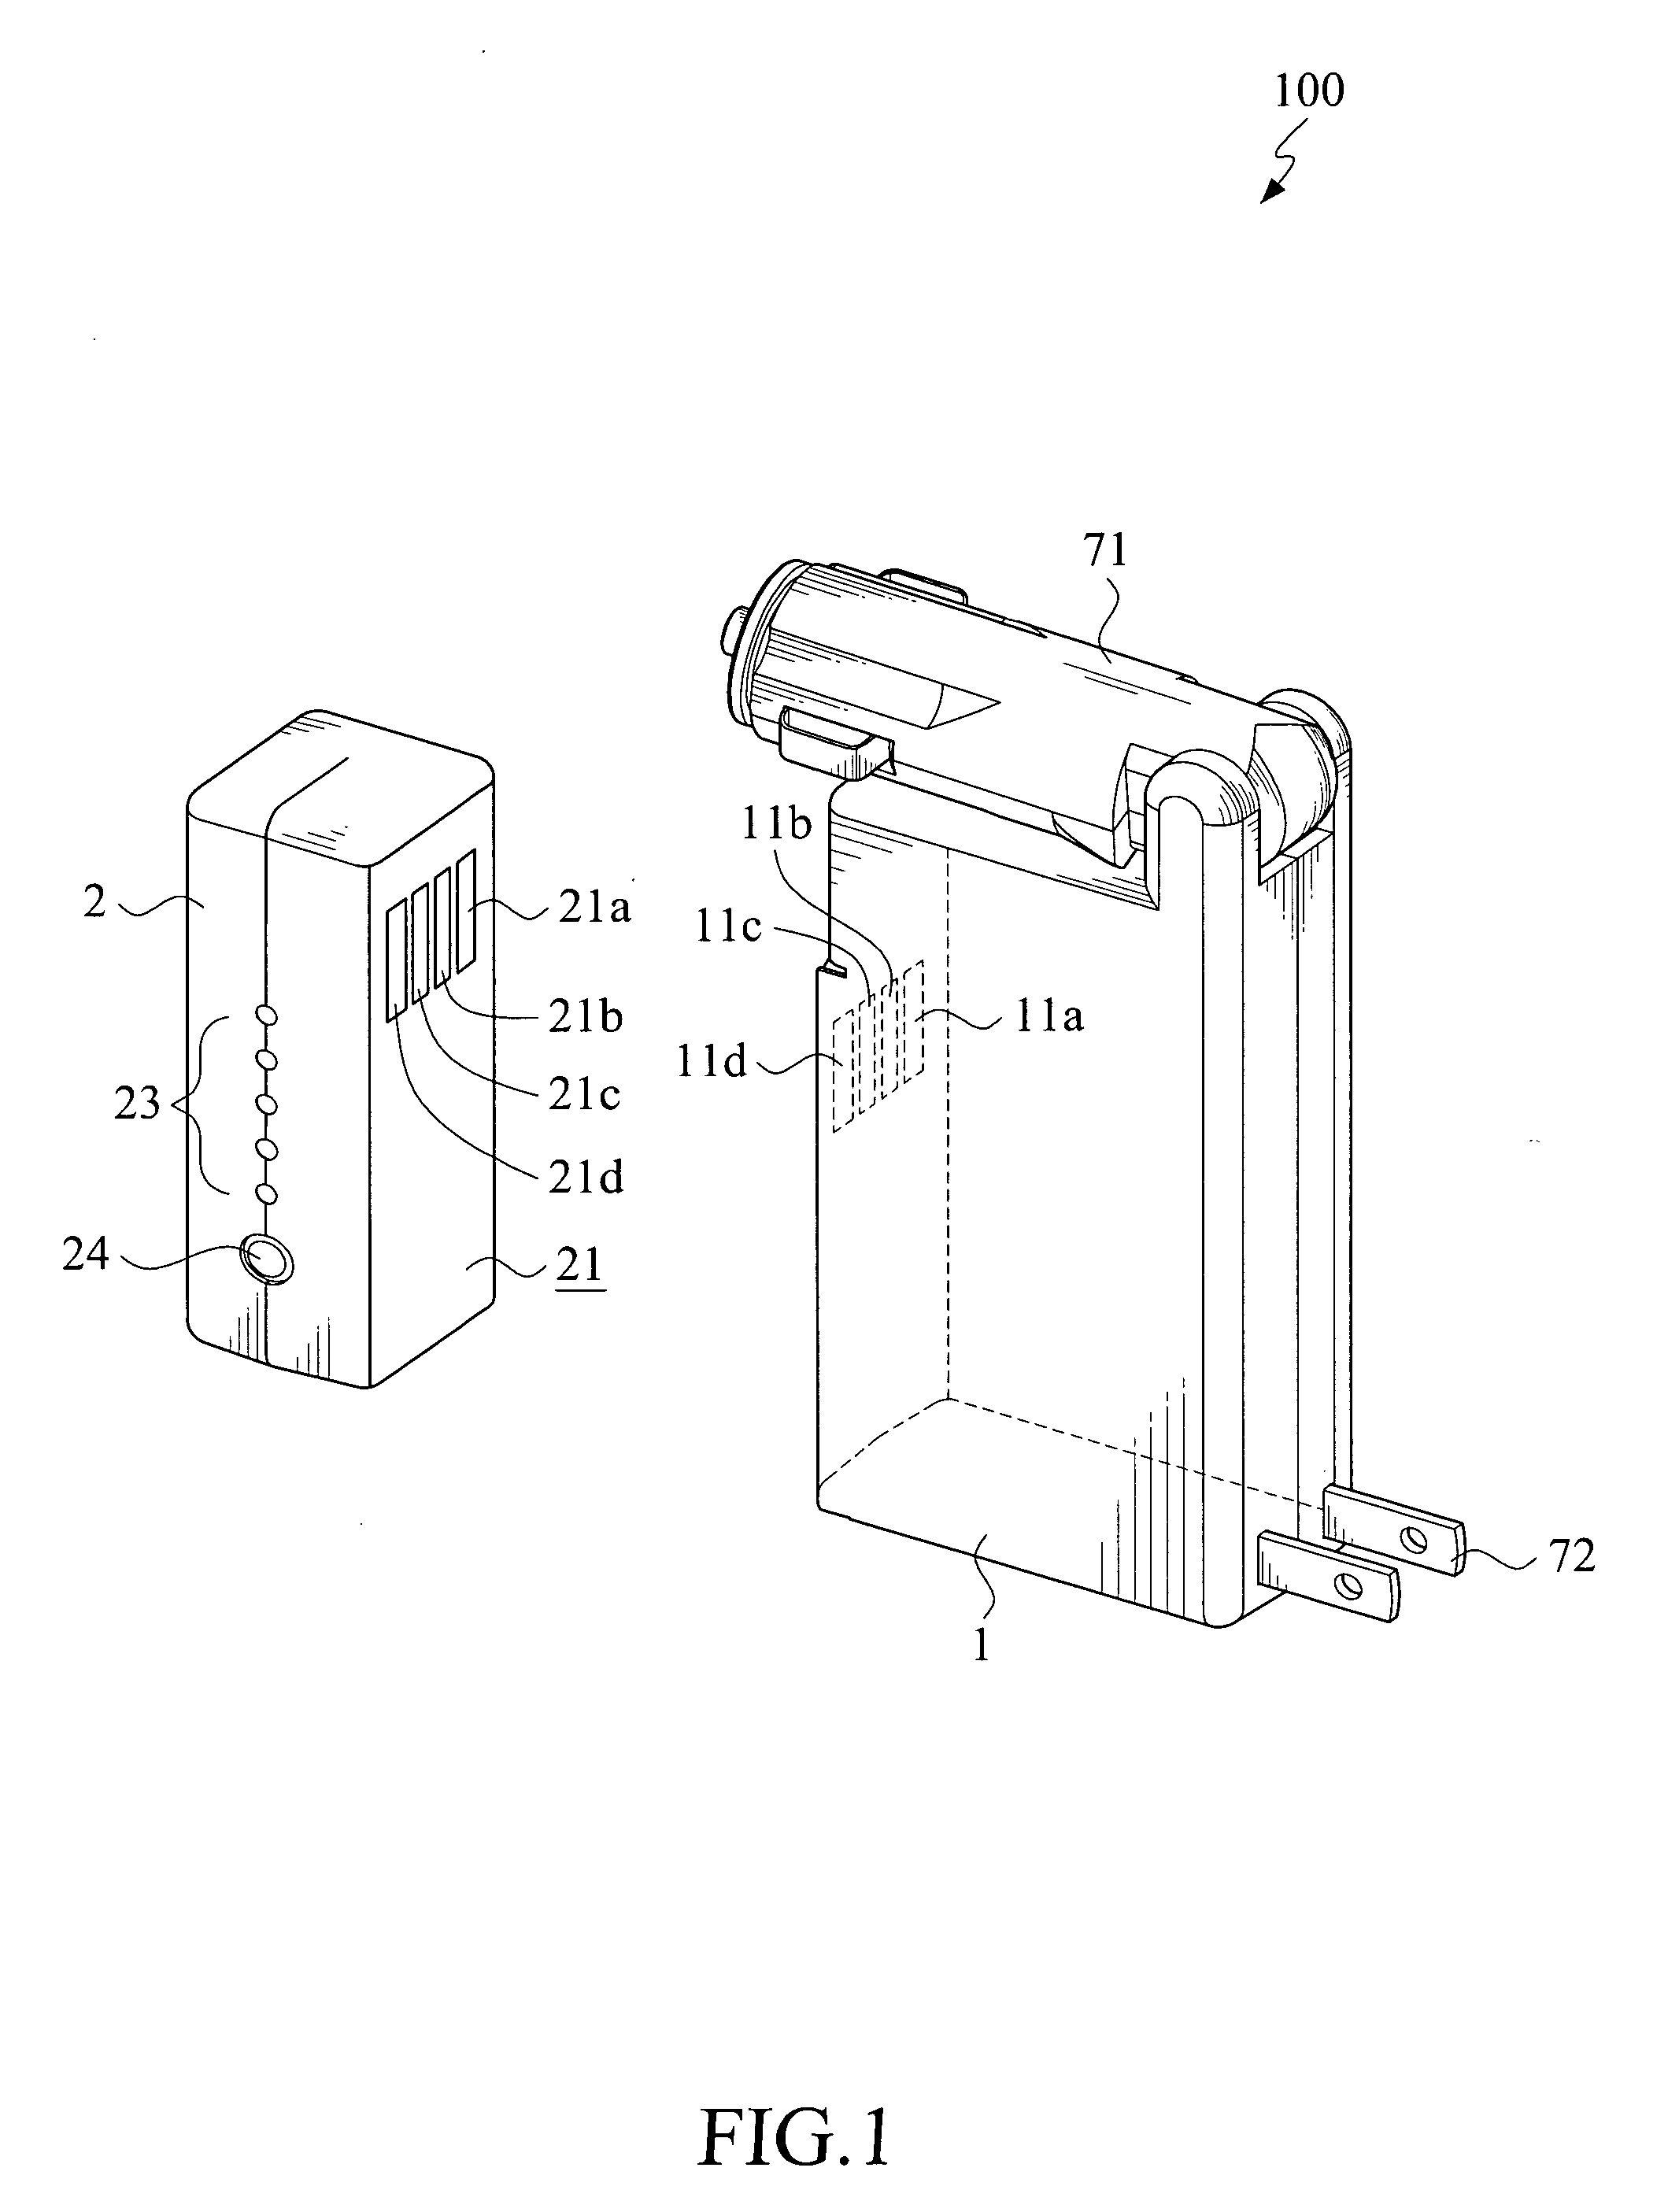 Multi-functional power storage and supply device